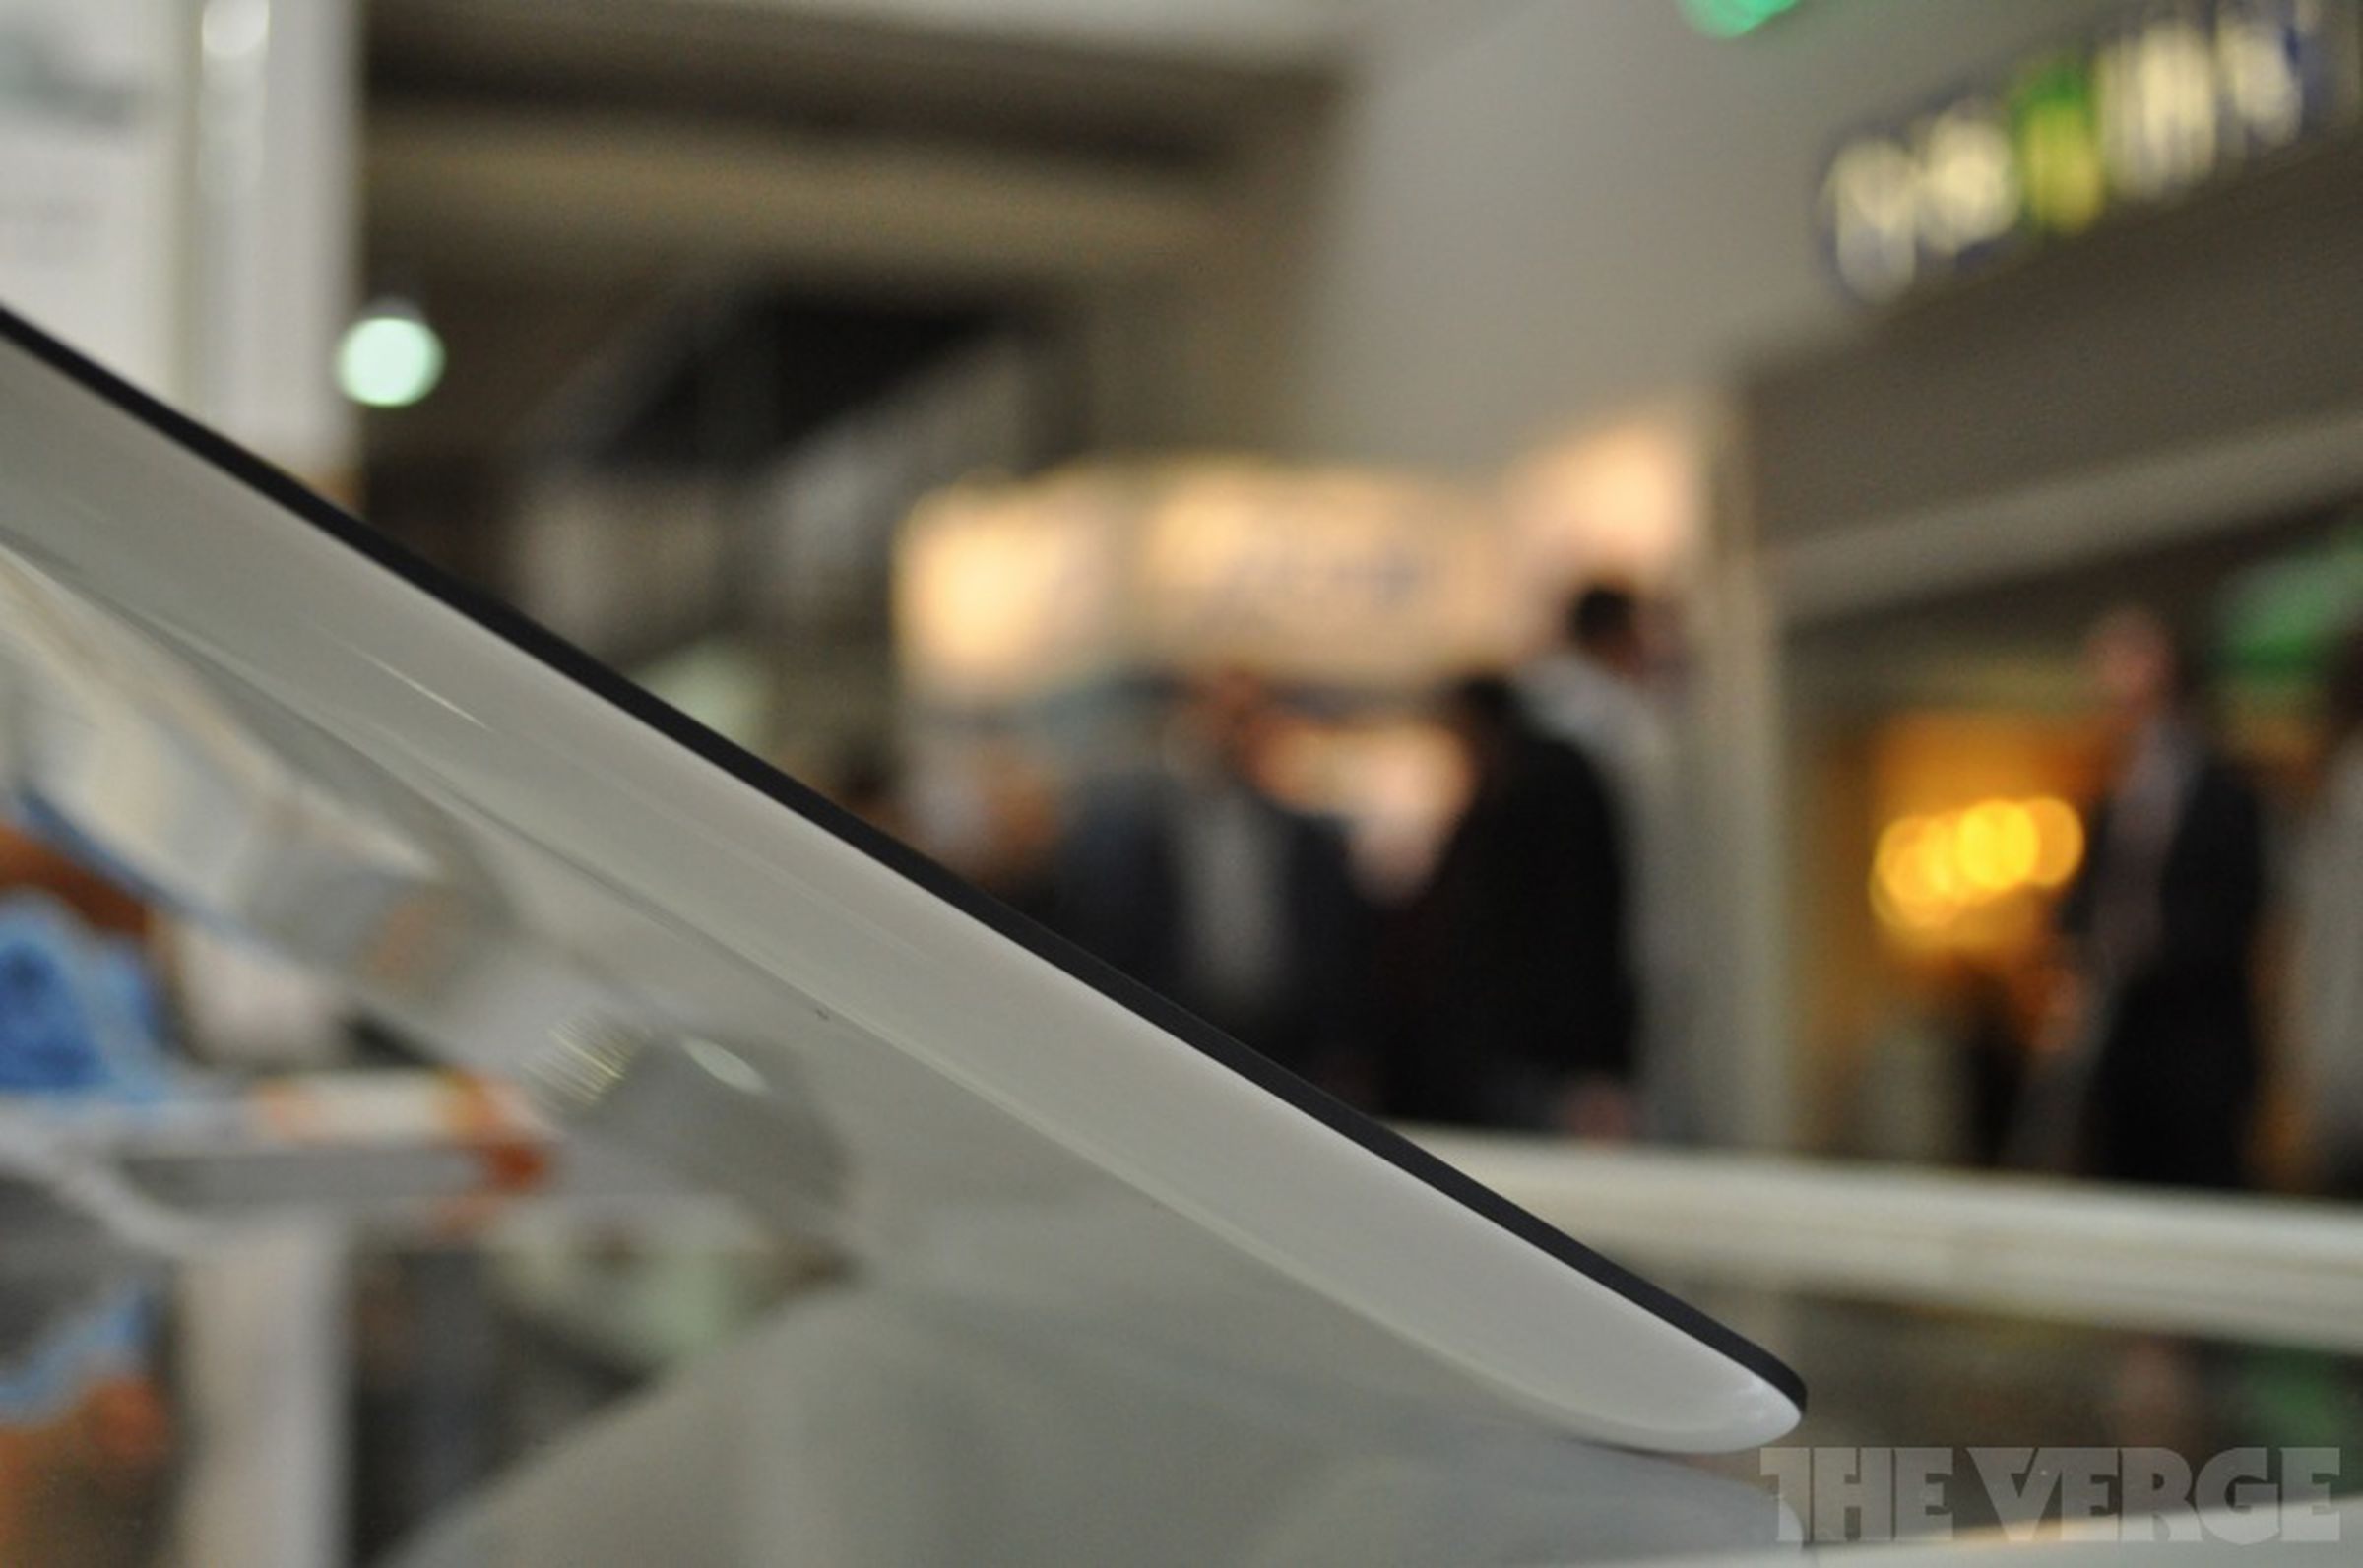 Viota M970 Android tablet hands-on images